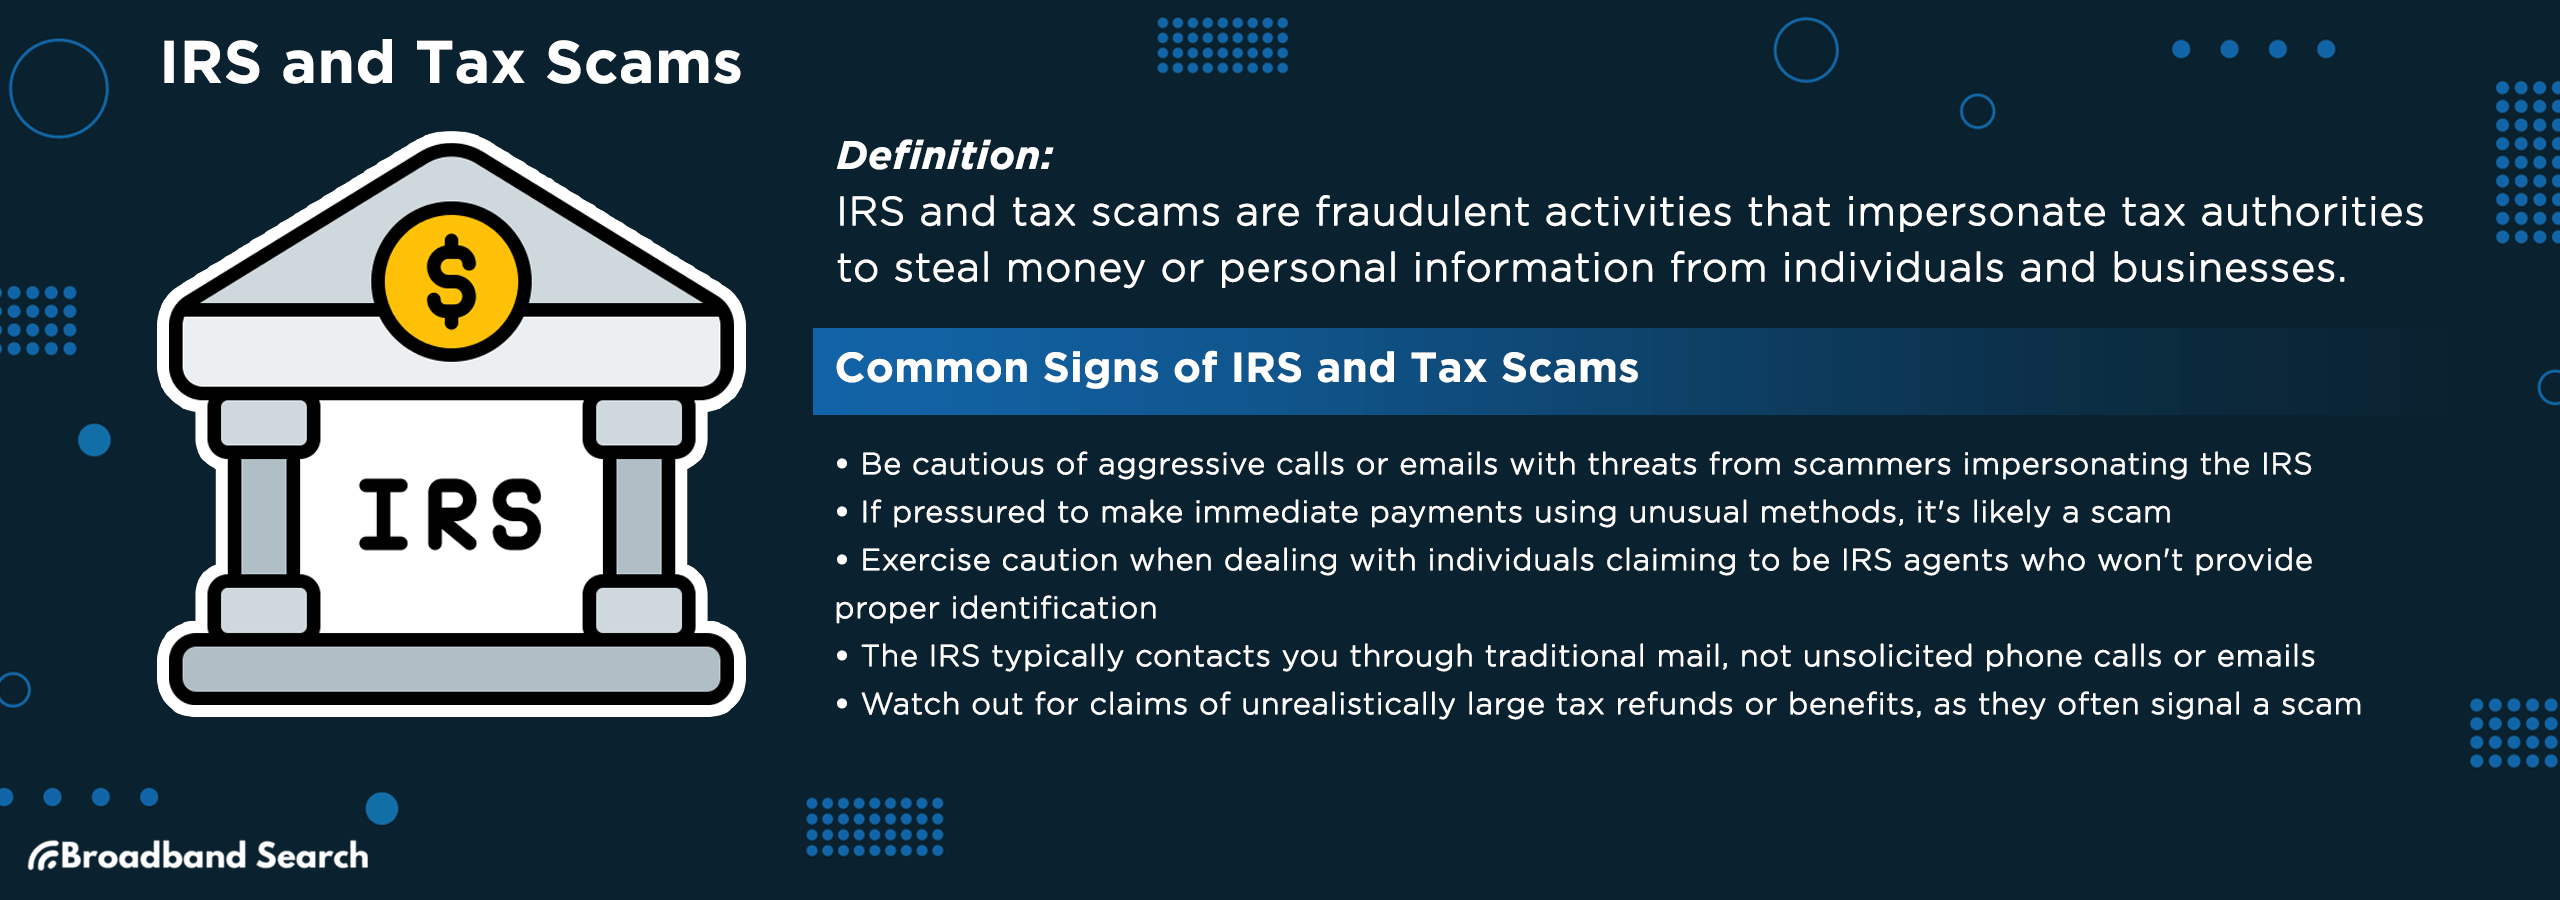 Definition and signs of IRS and tax scams